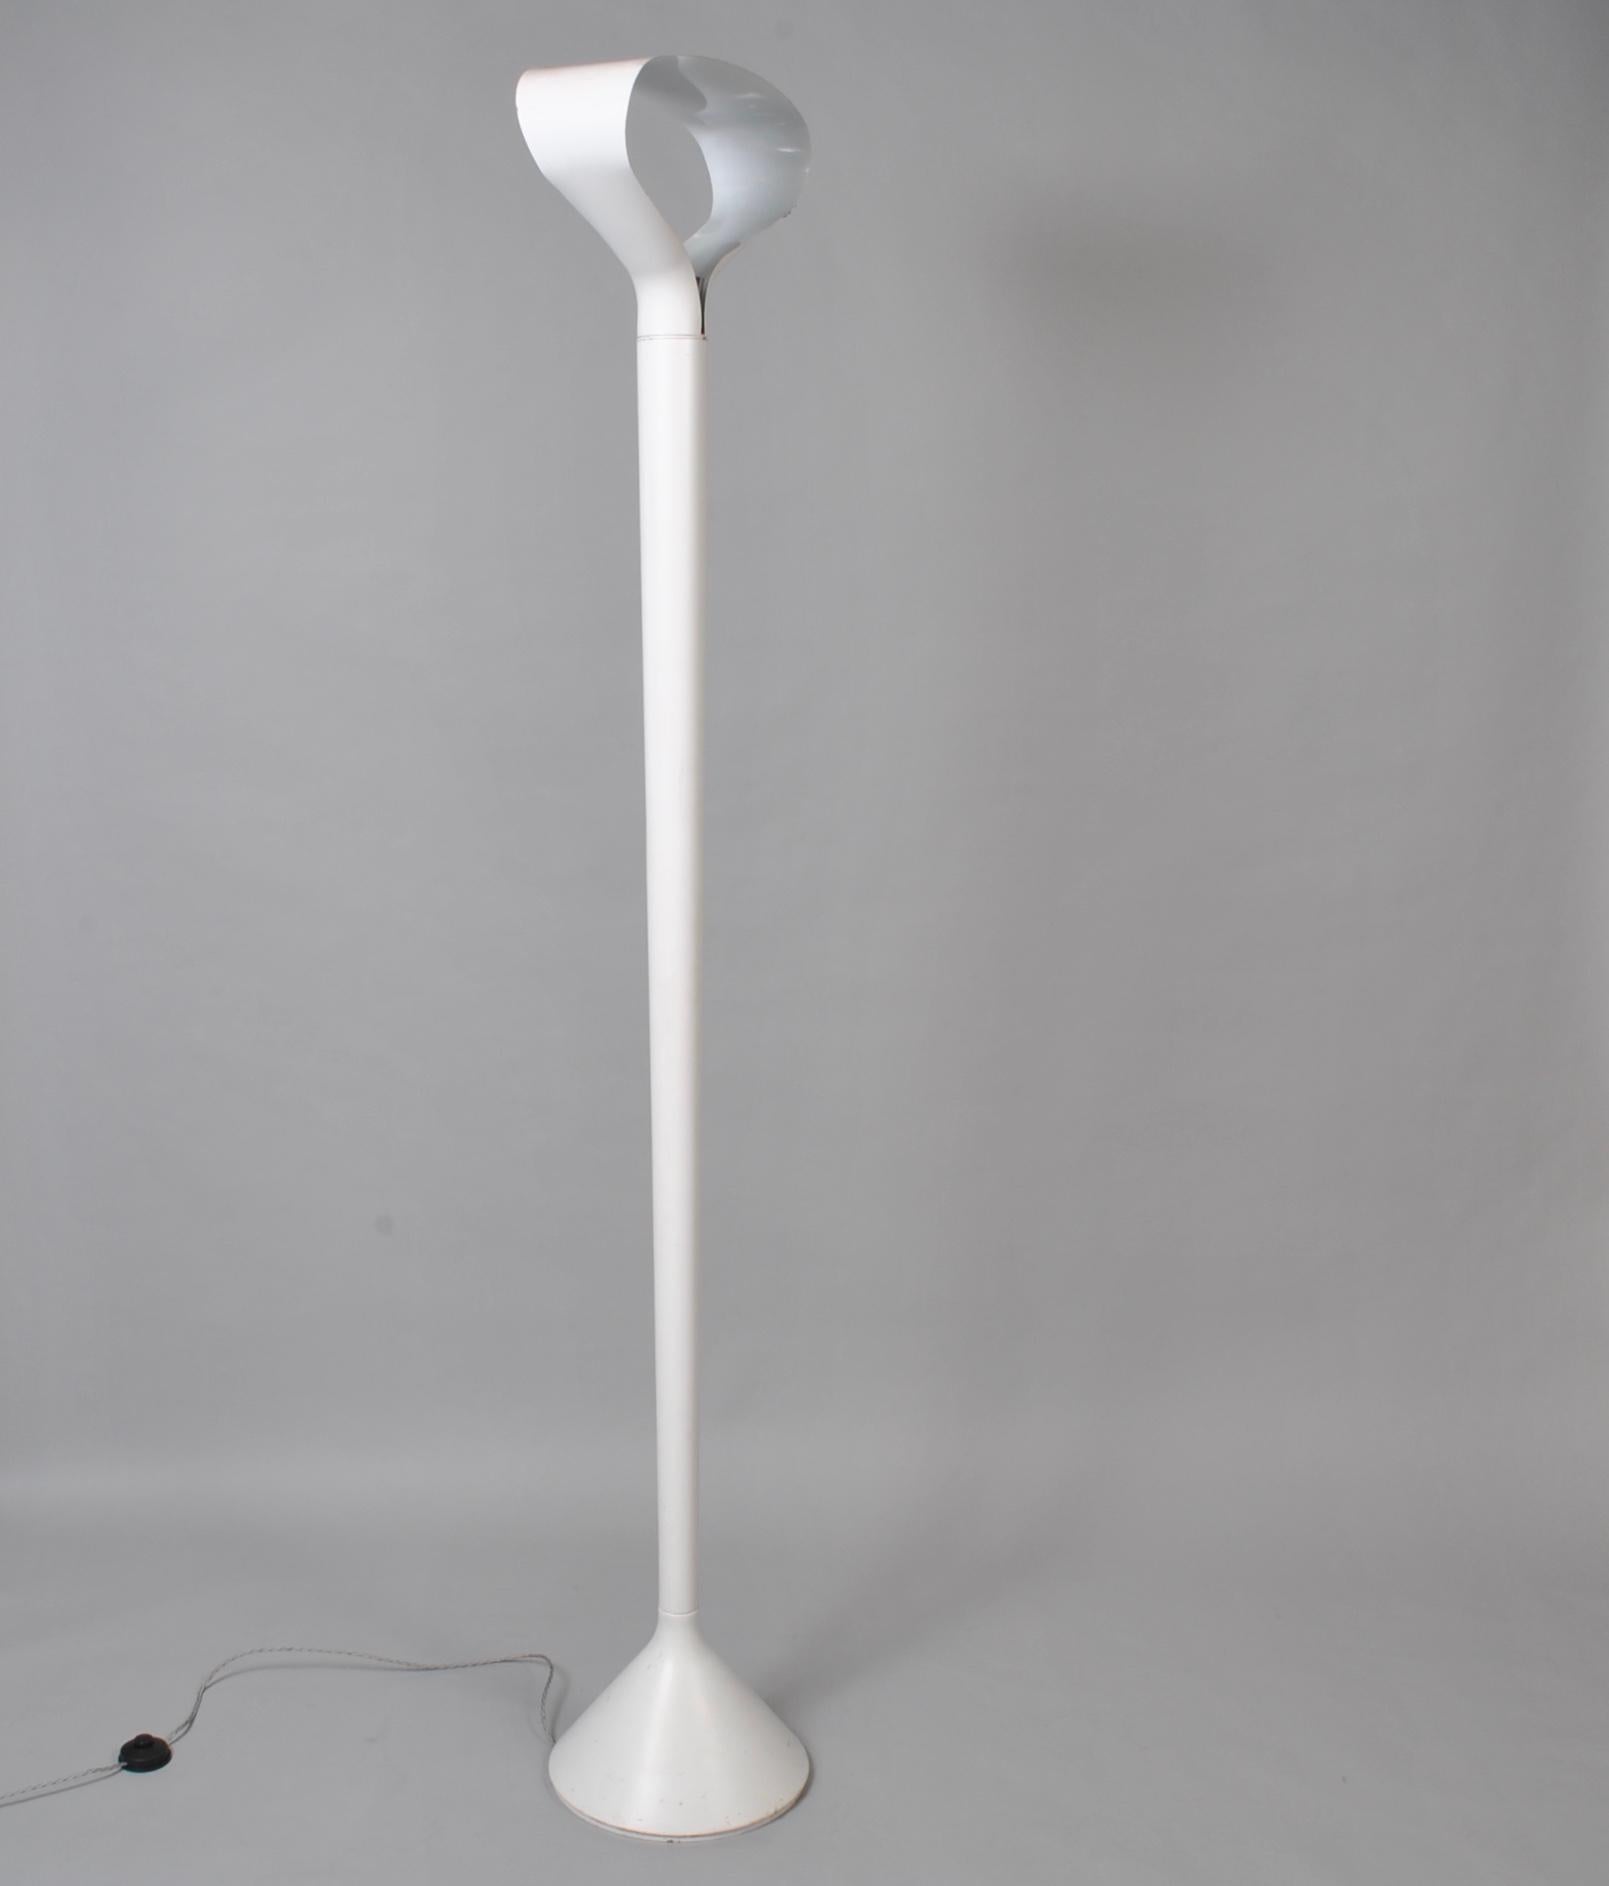 Highly unusual Italian Modernist floor lamp. White and red versions are available.
Red painted steel with solid cast resin base - very heavy. Fully rewired.
An impressive stand out piece of modernist design.